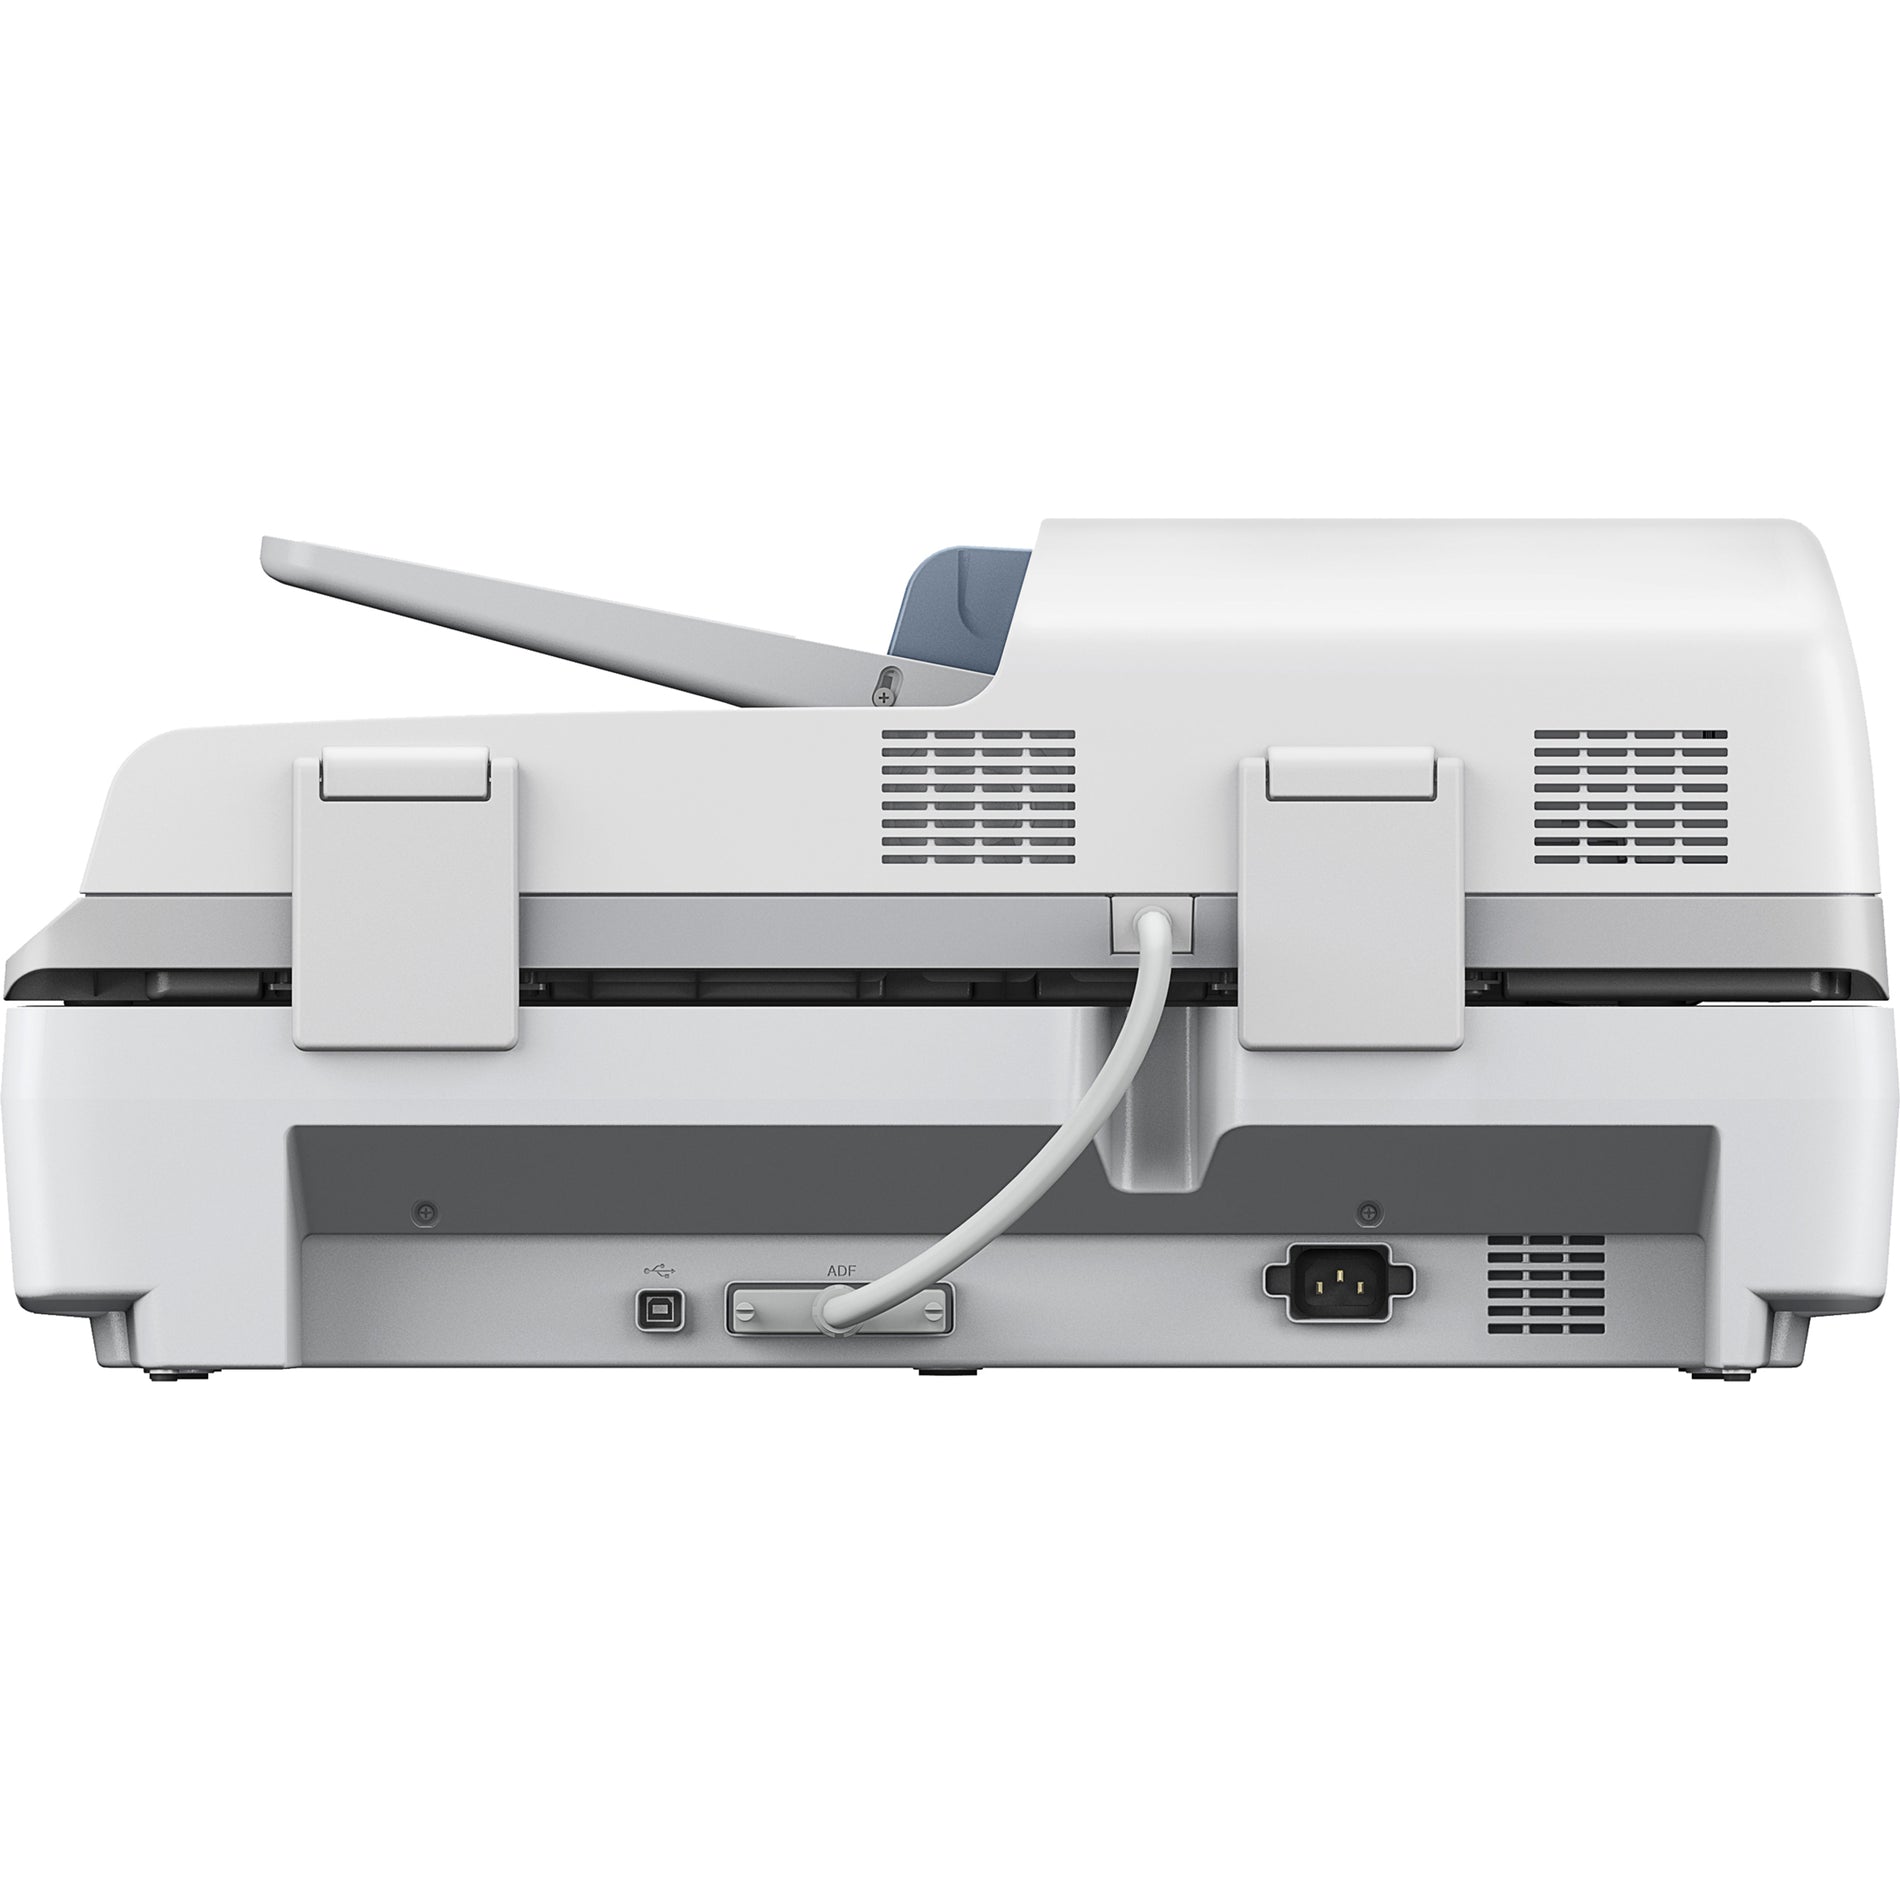 Epson B11B204221 WorkForce DS-60000 Document Scanner, High-Speed Color Scanning for Windows and Mac